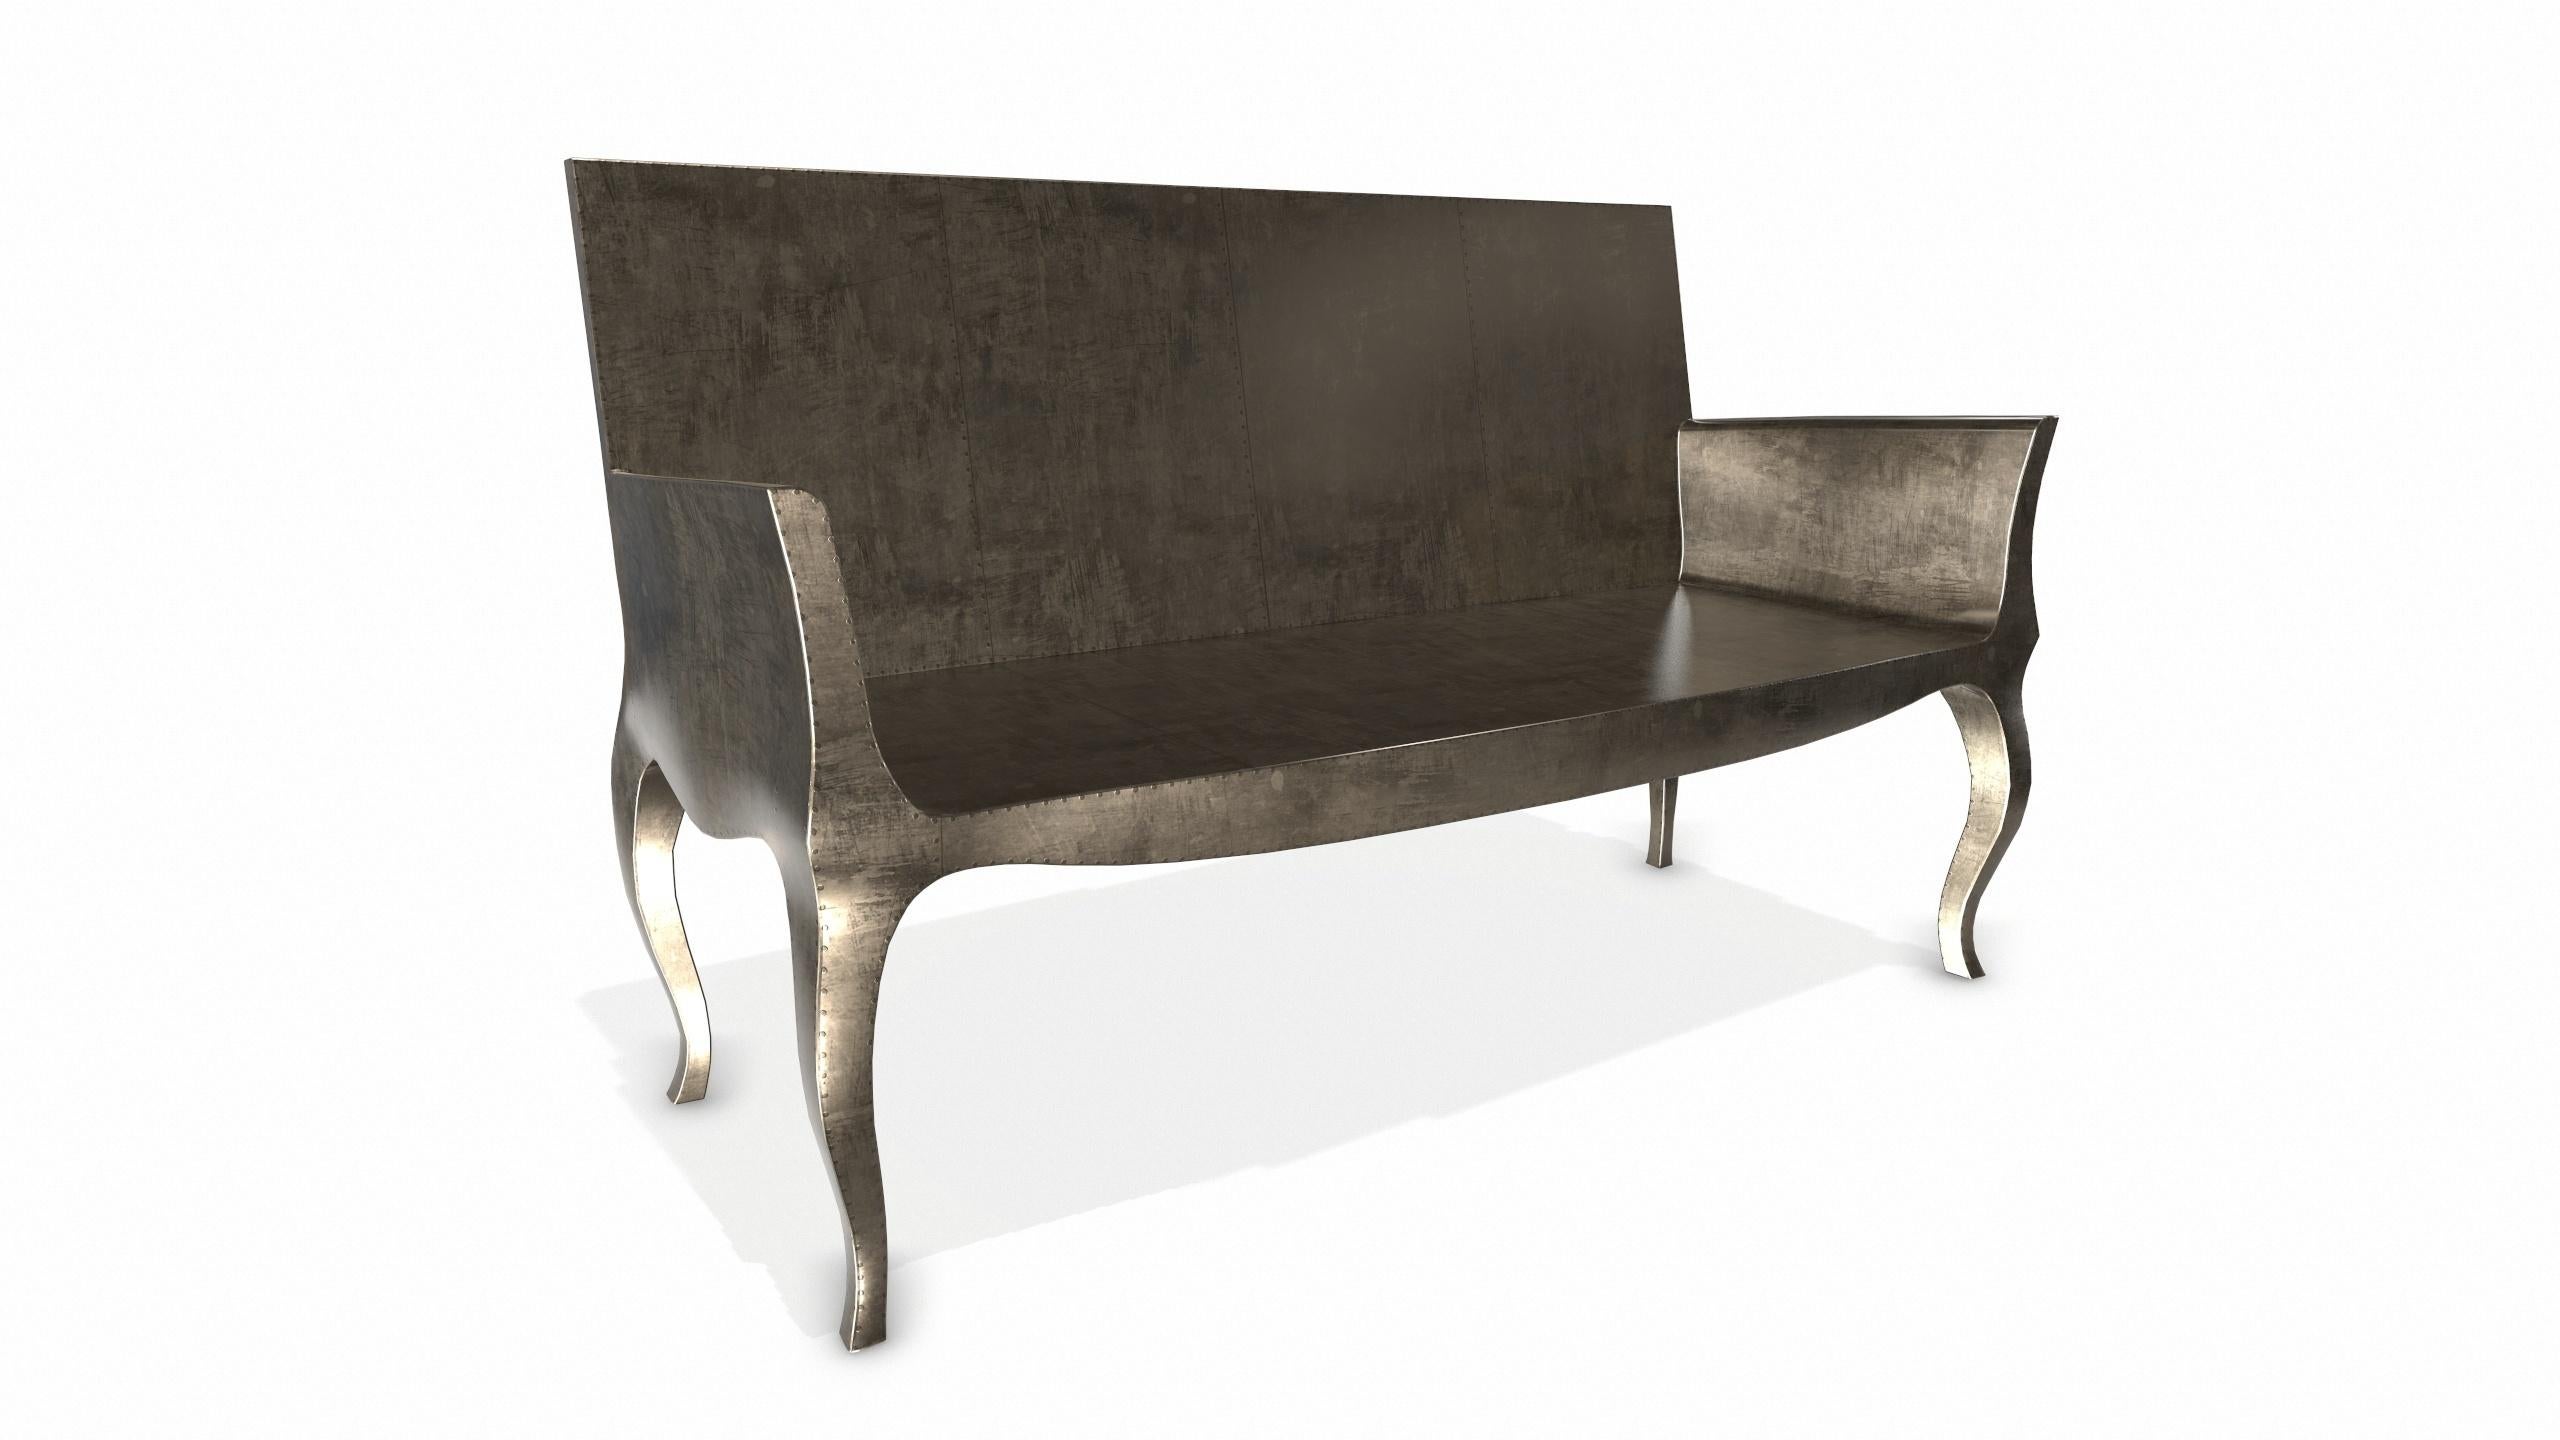 Contemporary Louise Settee Art Deco Benches in Smooth Antique Bronze by Paul Mathieu For Sale